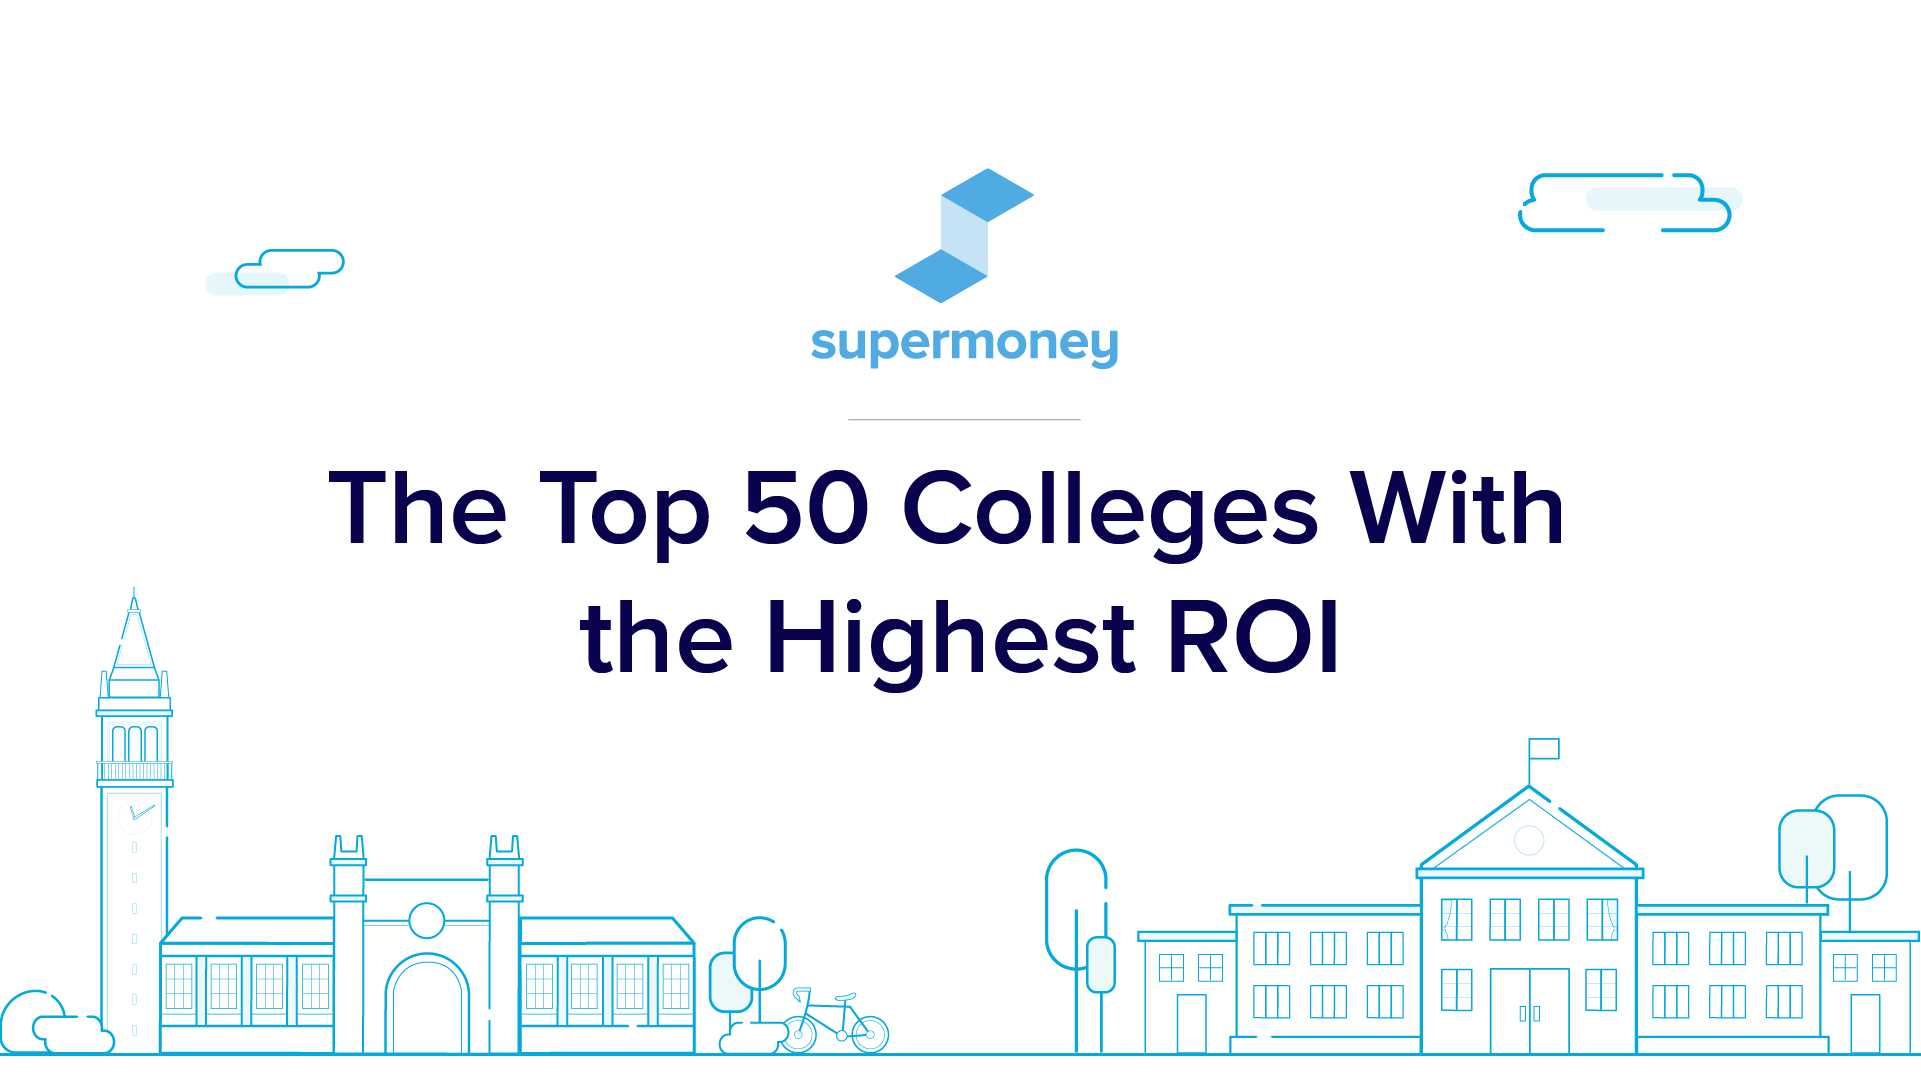 Top 50 colleges by ROI